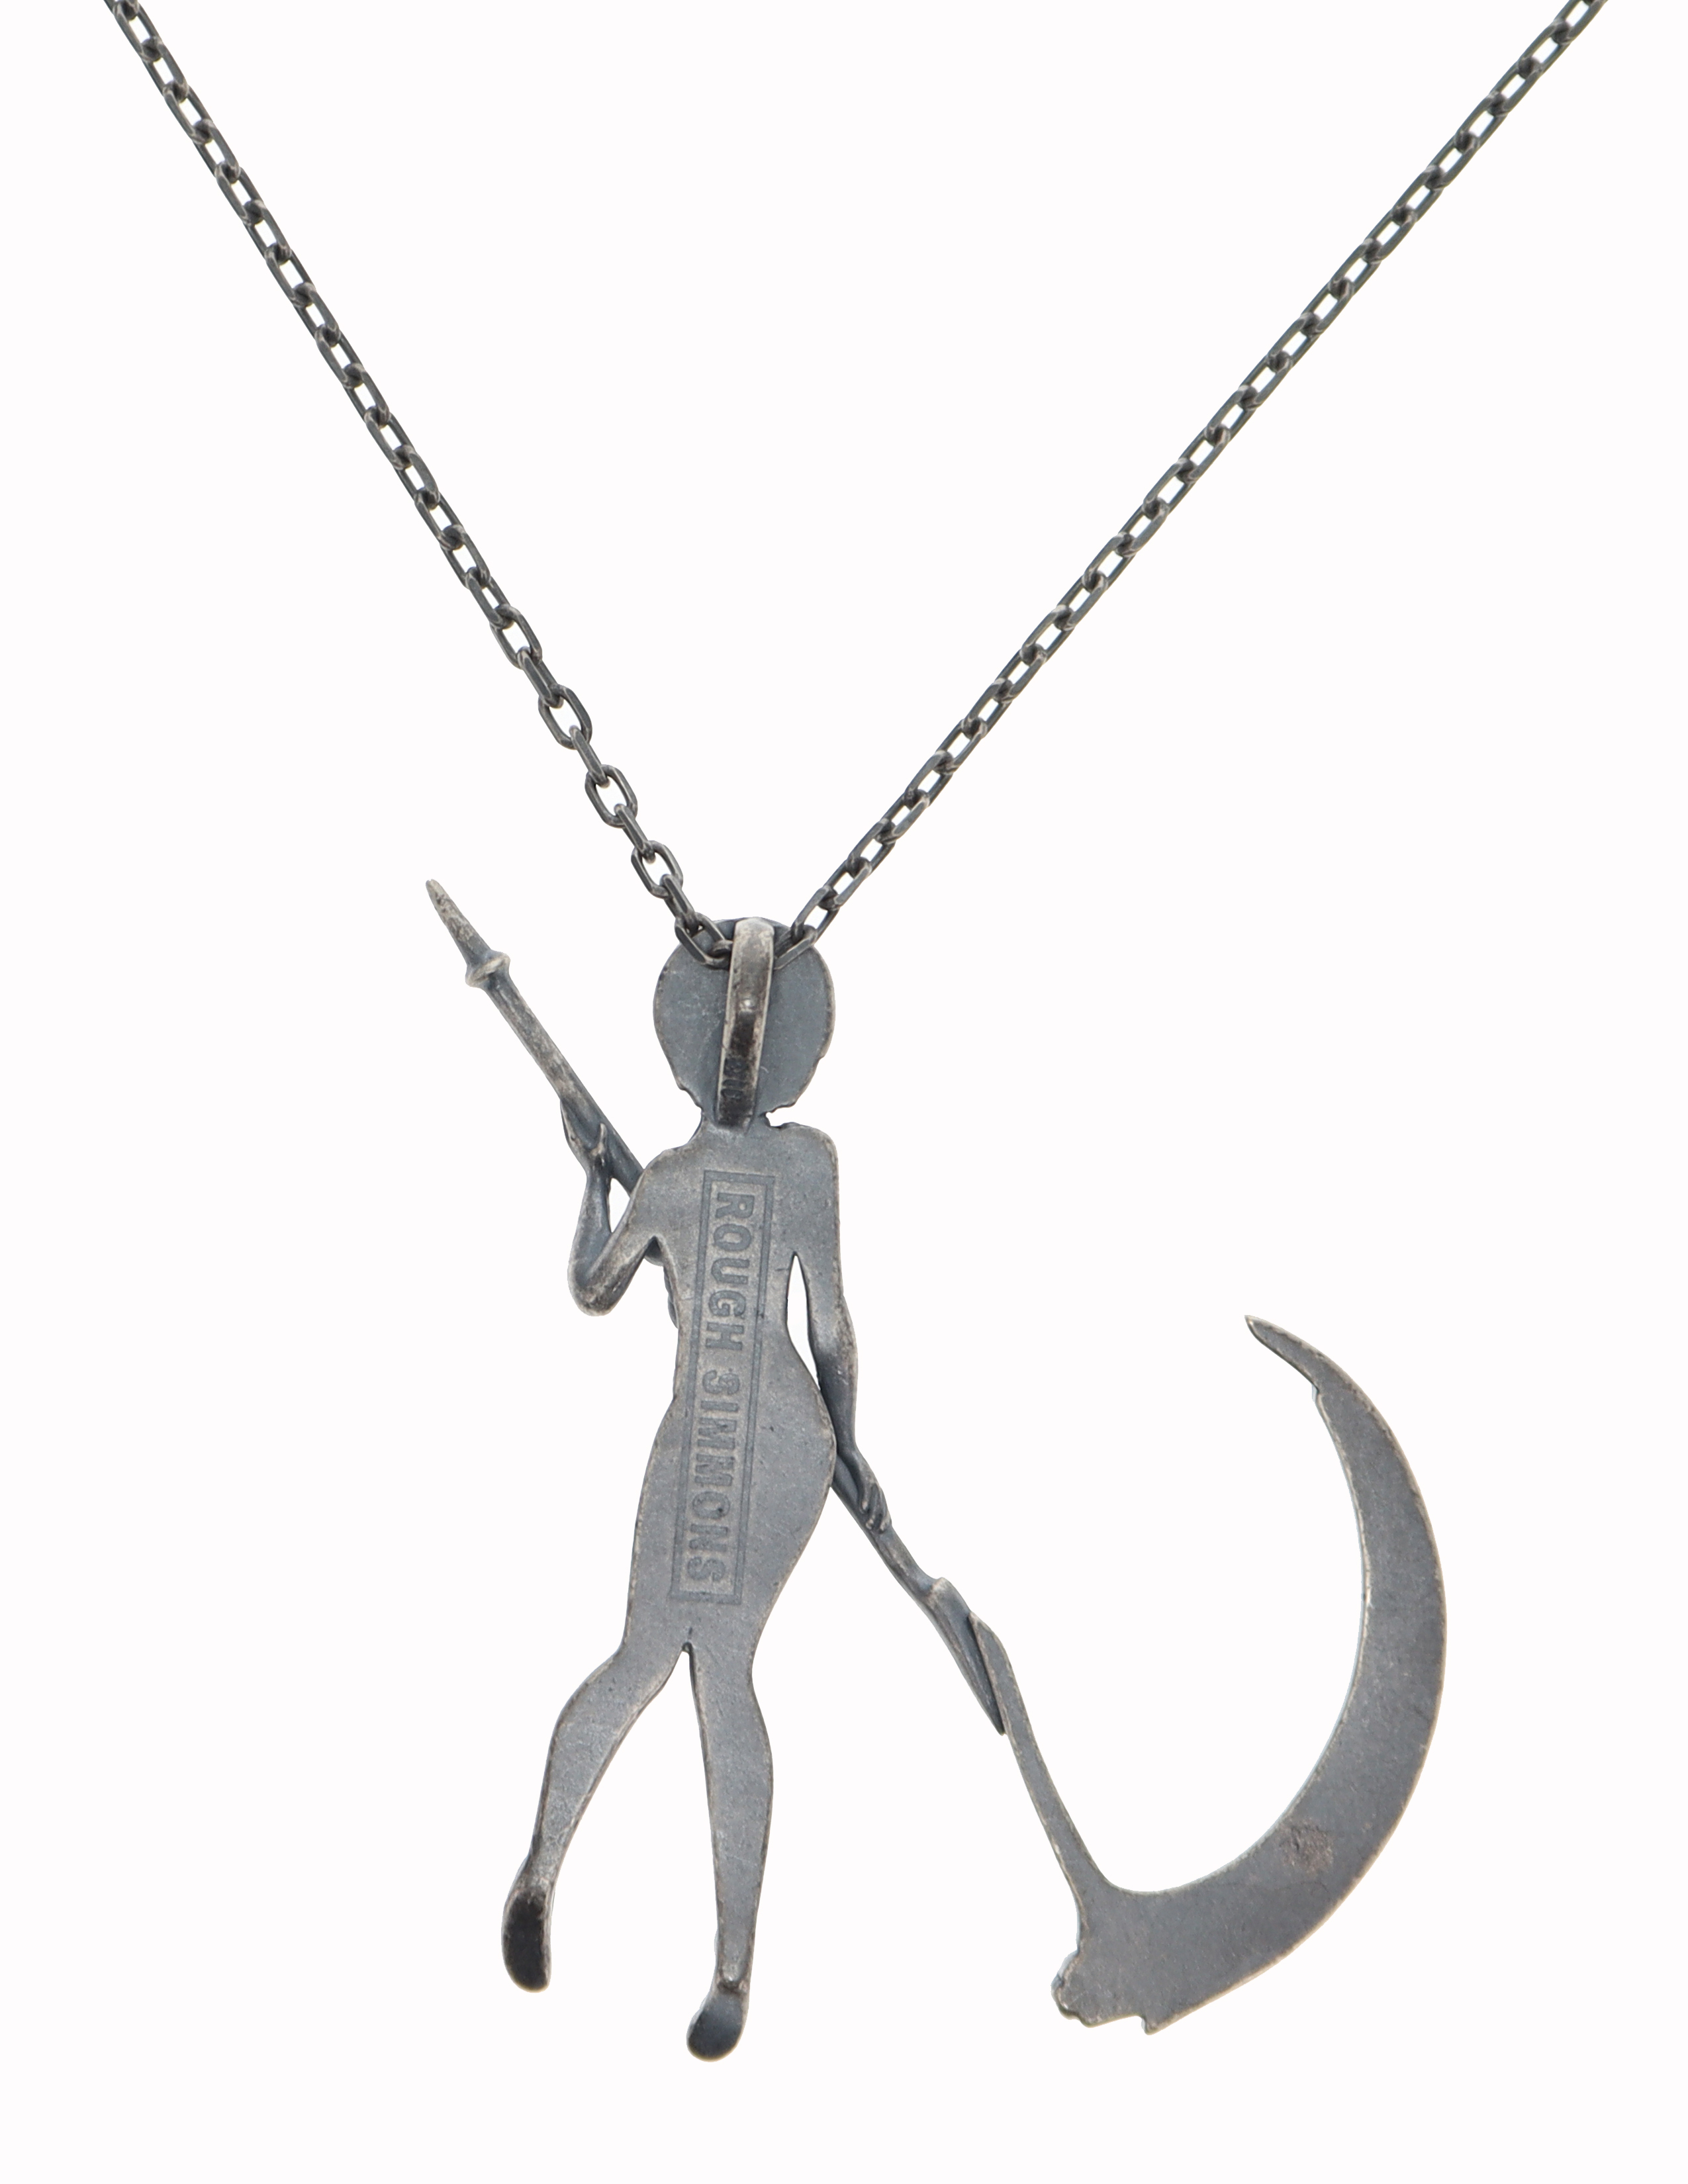 Rough Simmons Evangelion Silver Scythe Necklace - 2